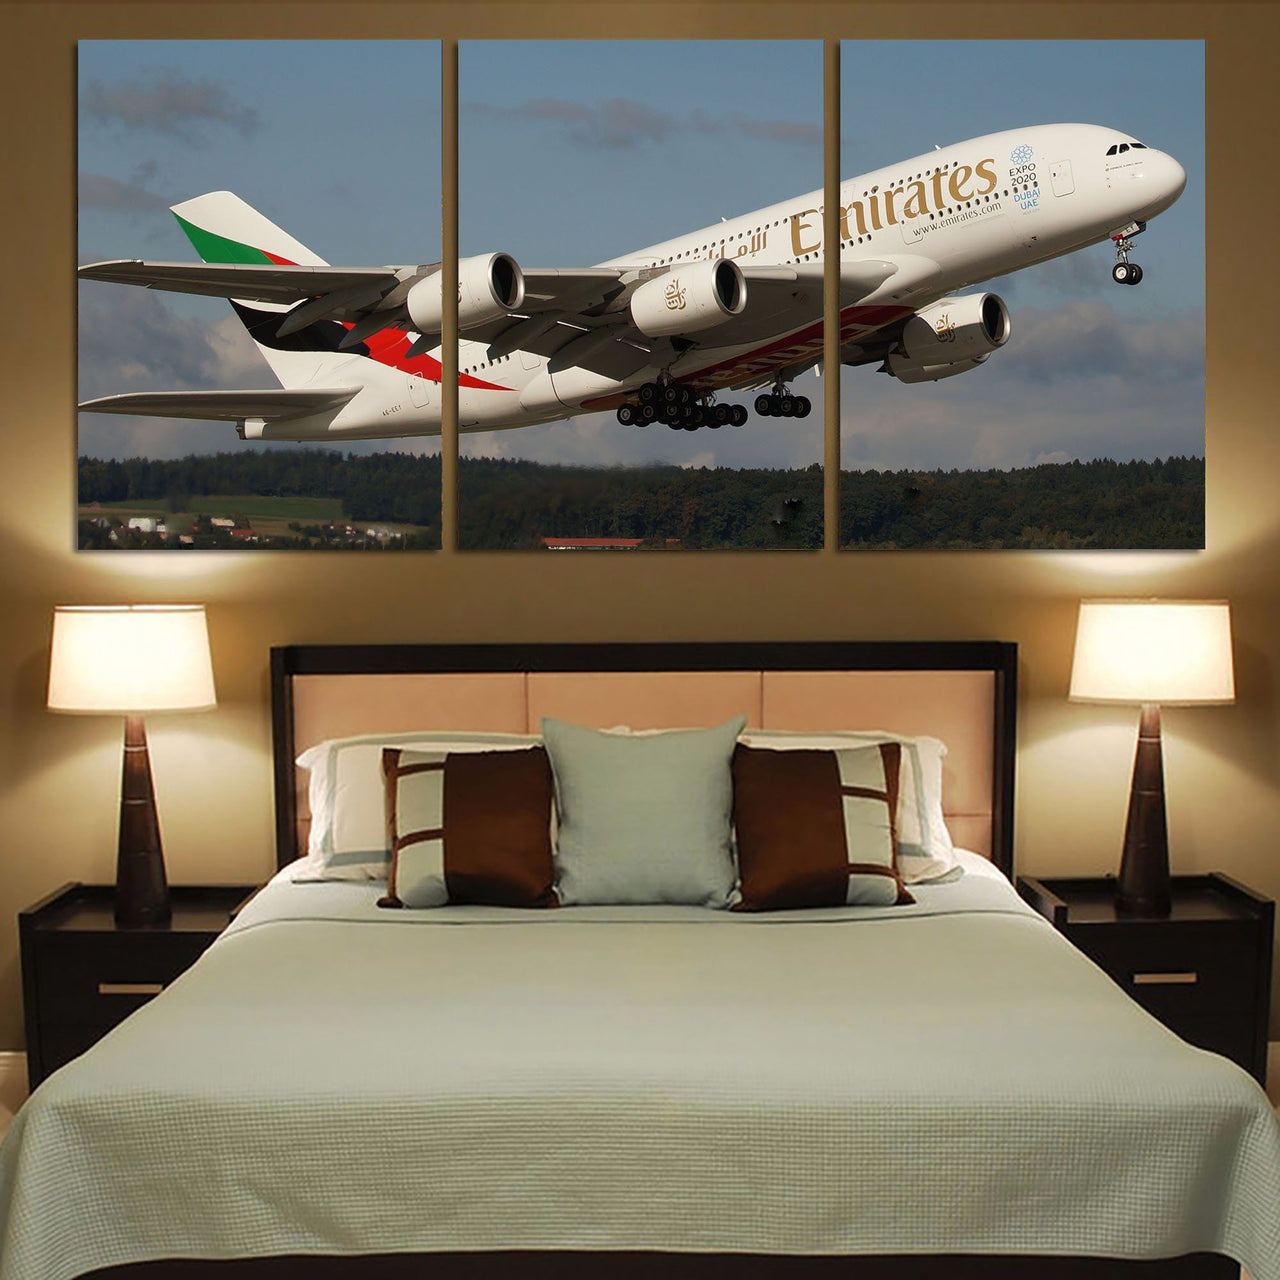 Departing Emirates A380 Printed Canvas Posters (3 Pieces) Aviation Shop 